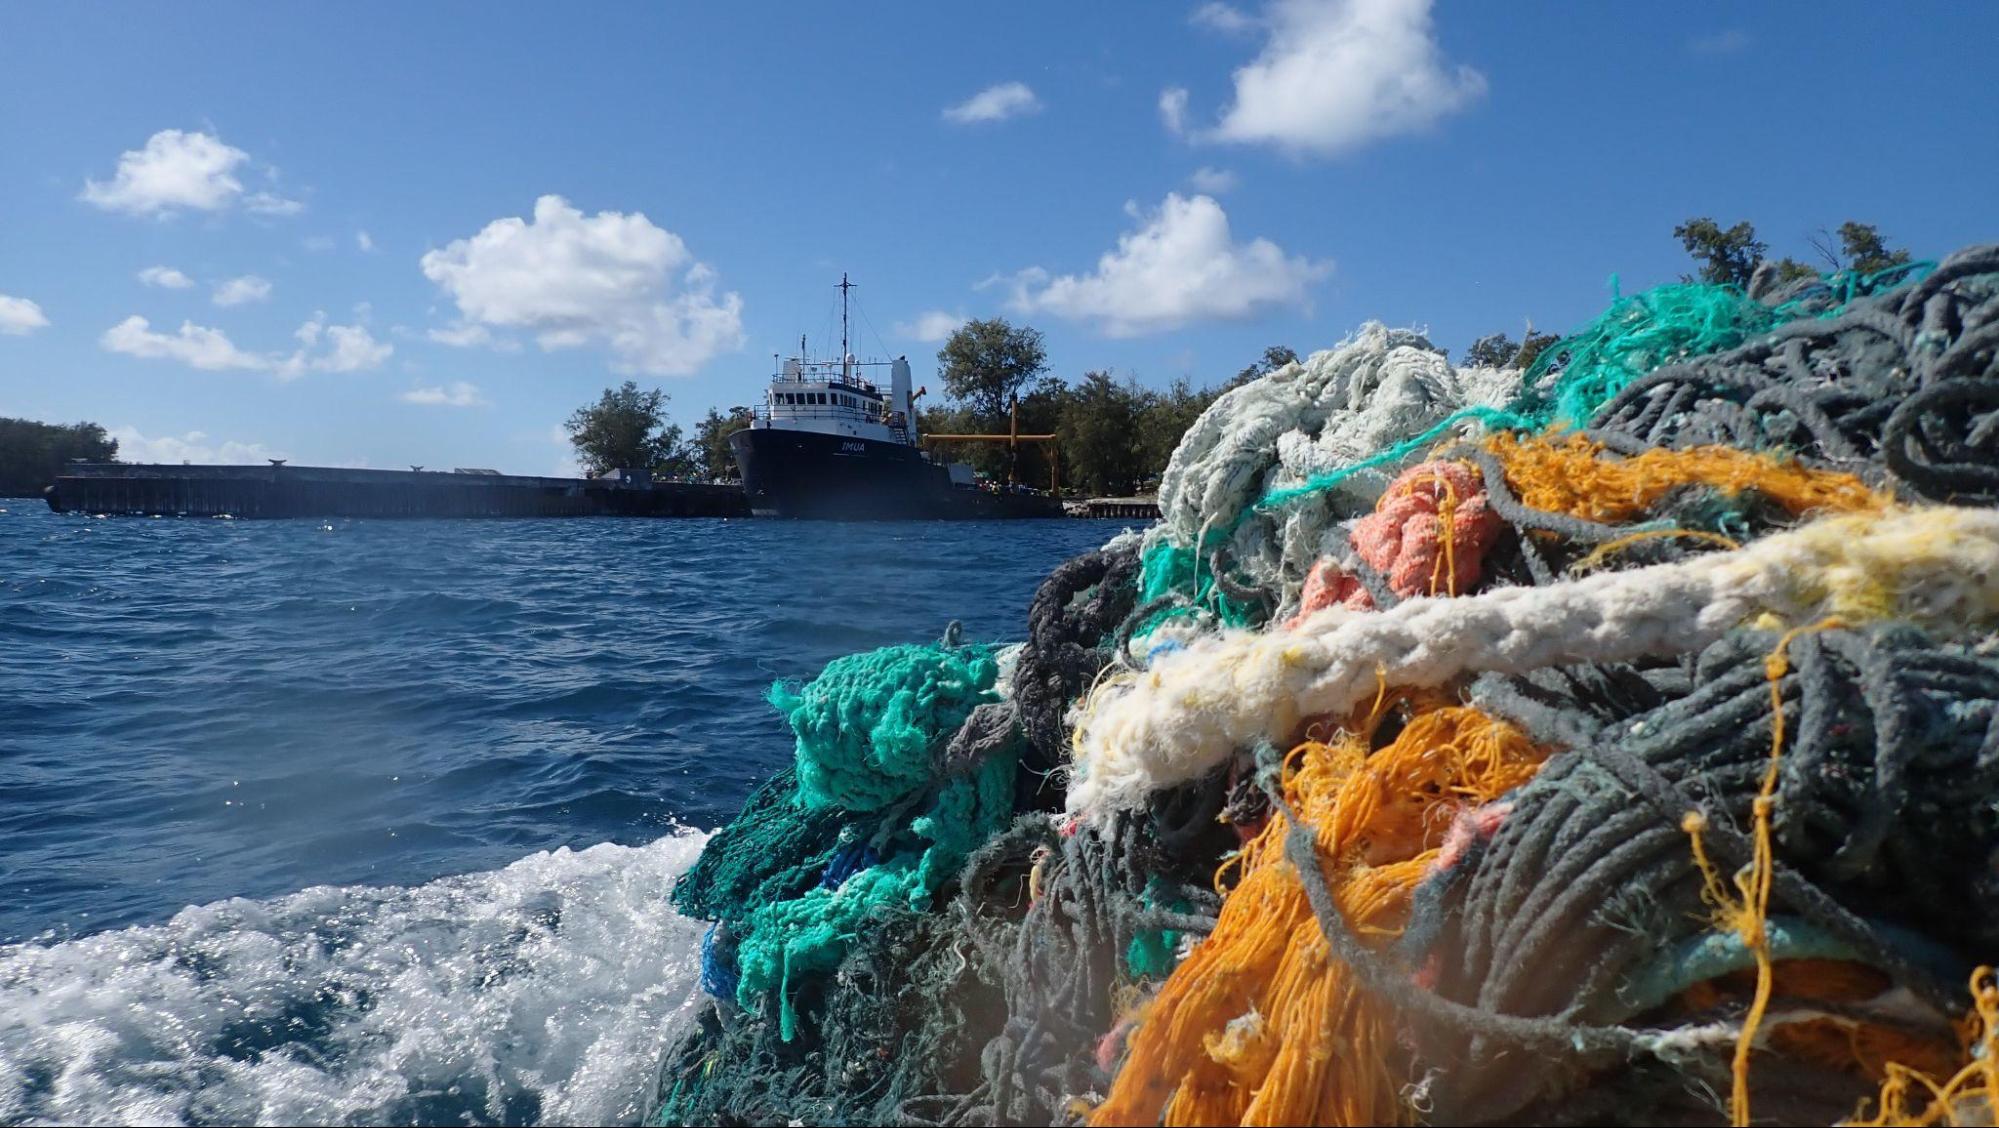 A Large Pile of Trawler Fishing Nets, Ropes and Debris Dredged Up